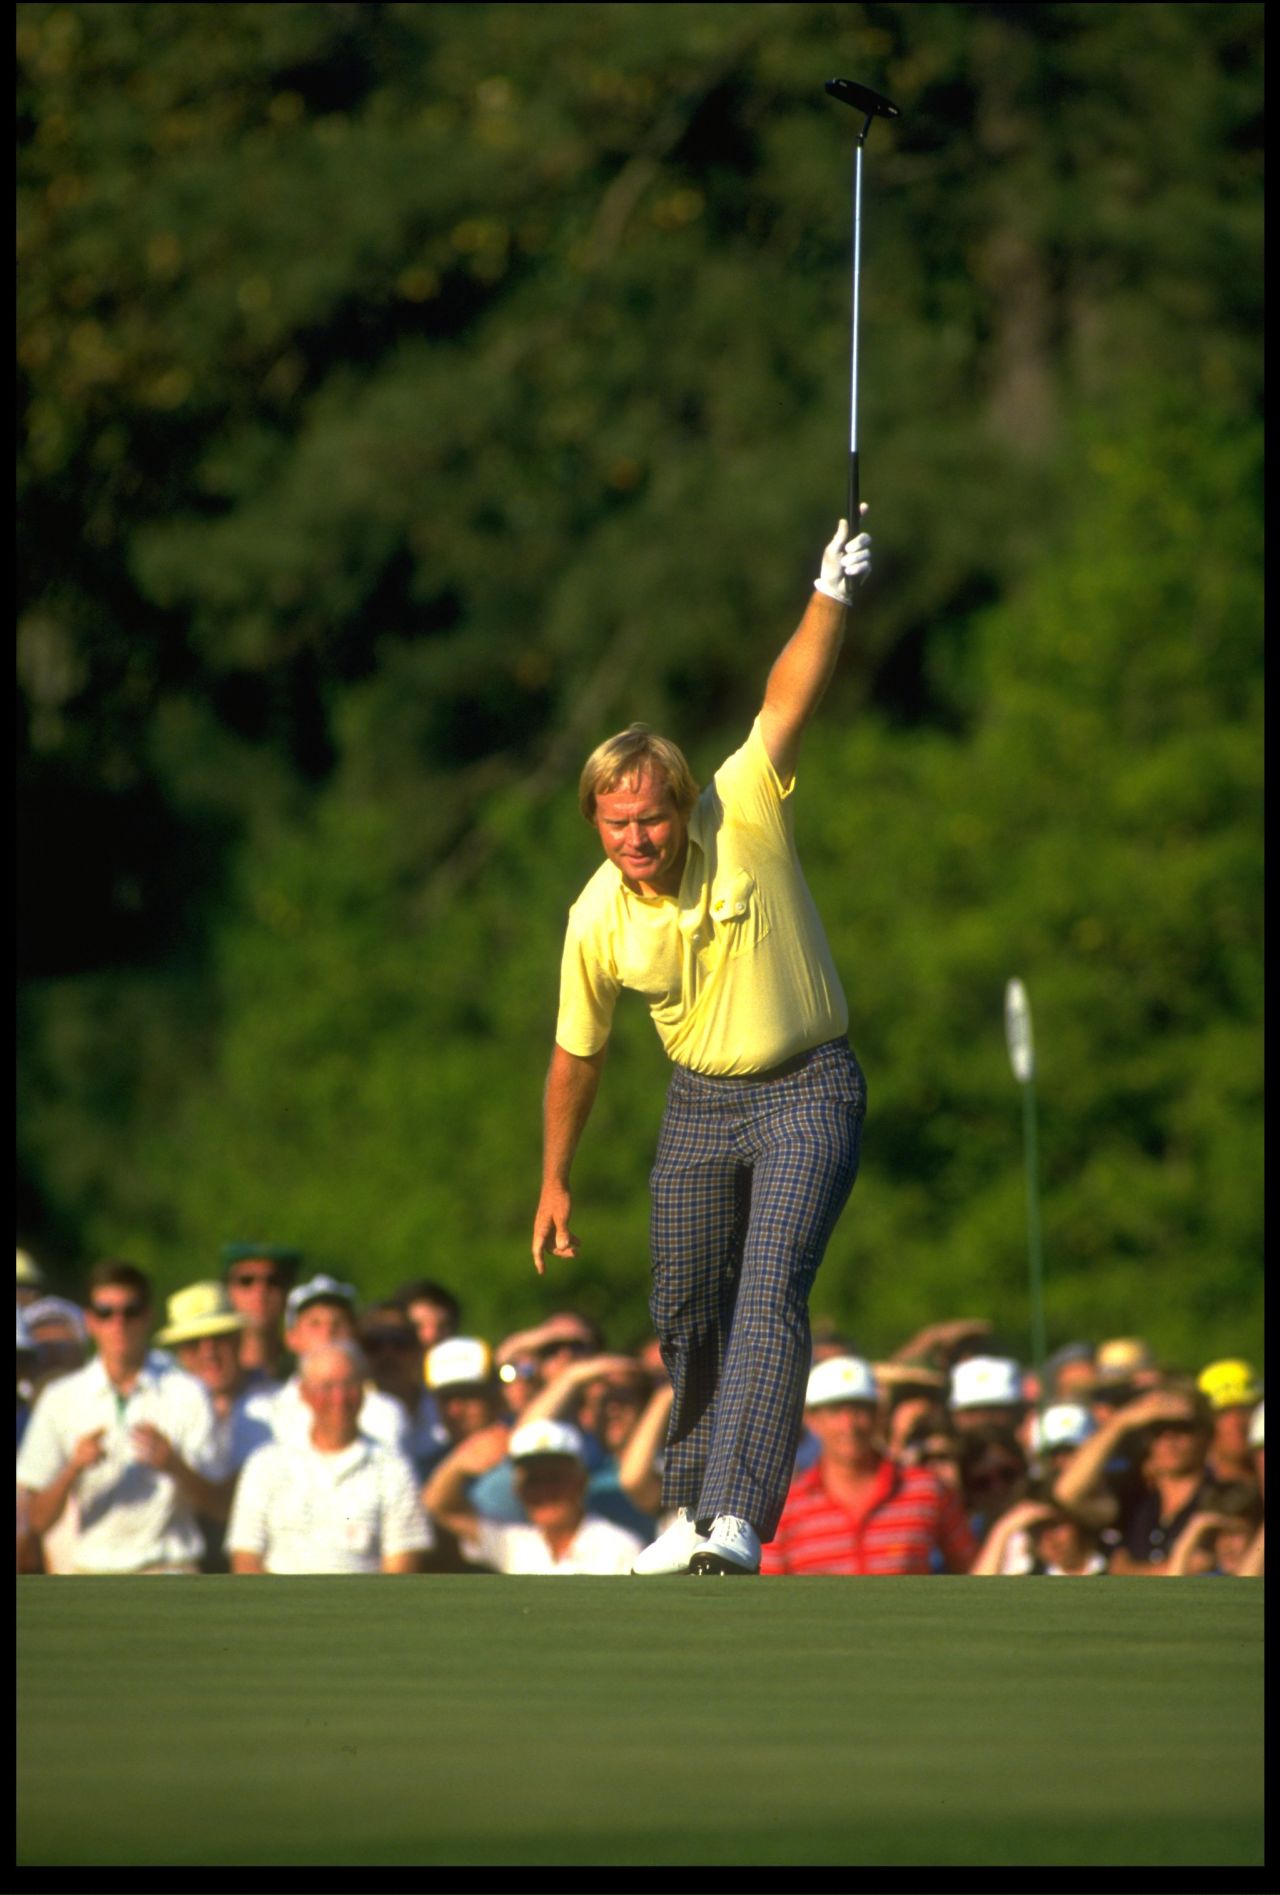 One of the most famous images in golf: Nicklaus rolls in a birdie putt during his victory charge at the Masters in 1986, when -- age 46 -- he became the major event's oldest winner.  